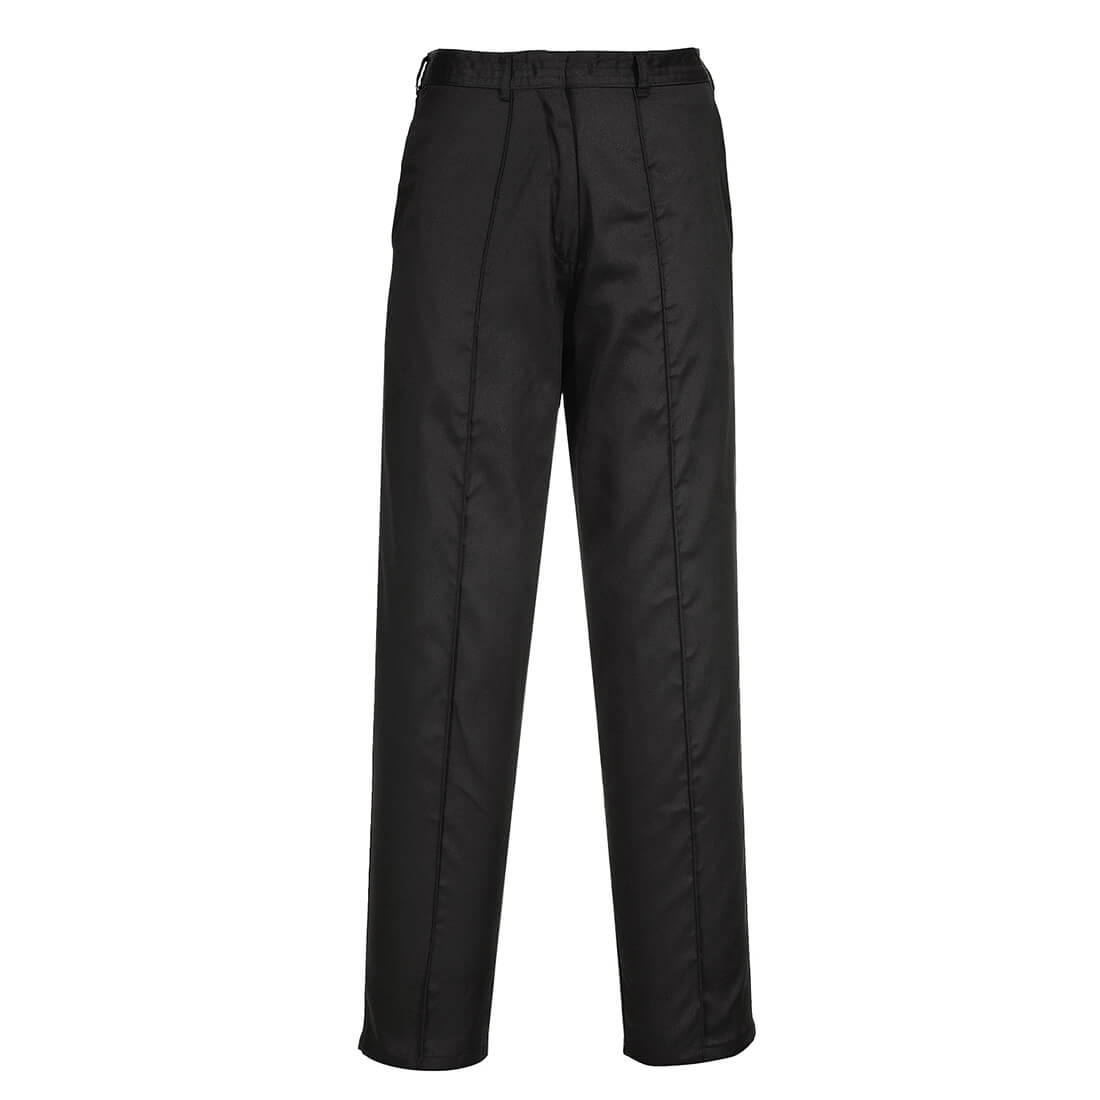 Image of Portwest LW97 ladies Elasticated Trousers Black XS 31"